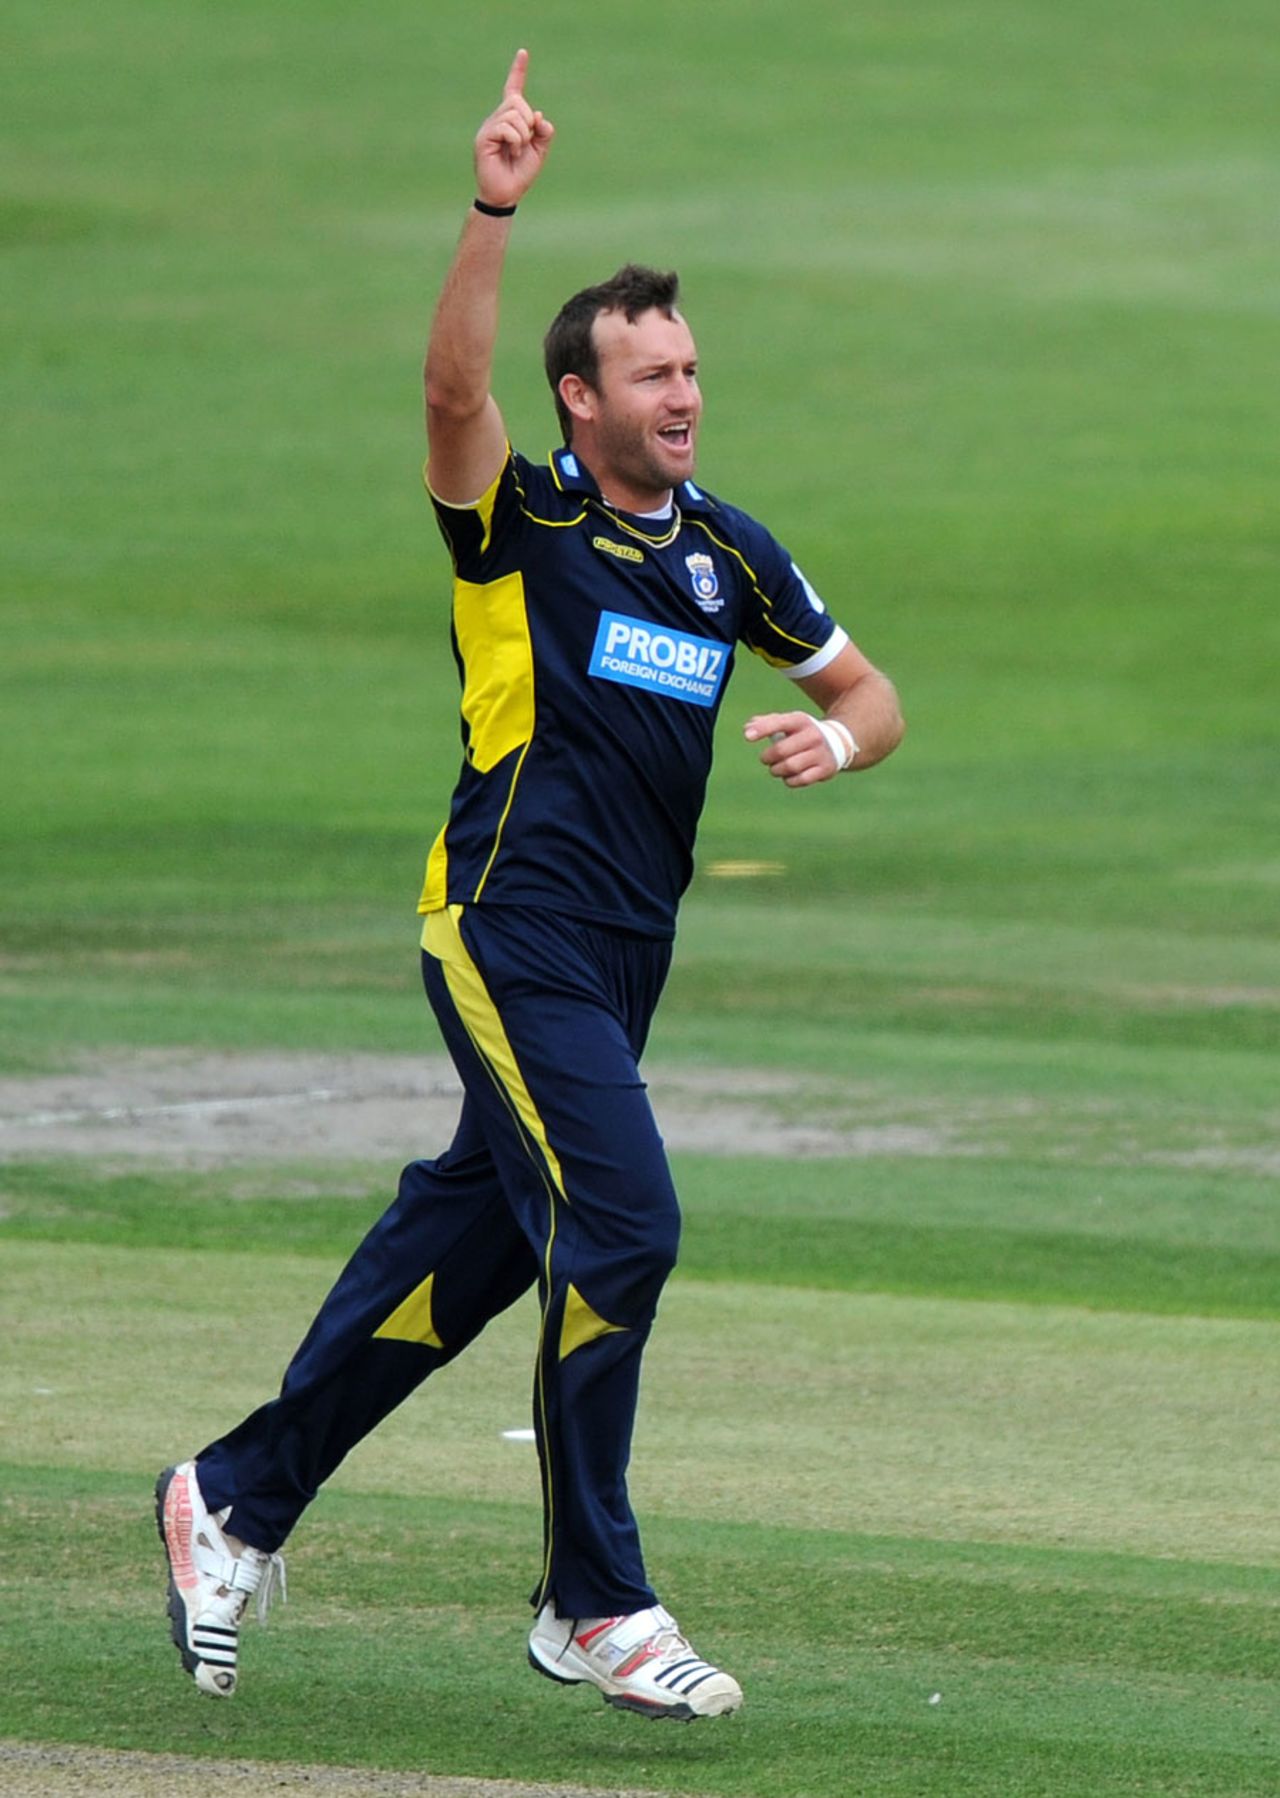 Sean Ervine sparked Hampshire's fightback with three wickets, Sussex v Hampshire, CB40 semi-final, Hove, September 1, 2012